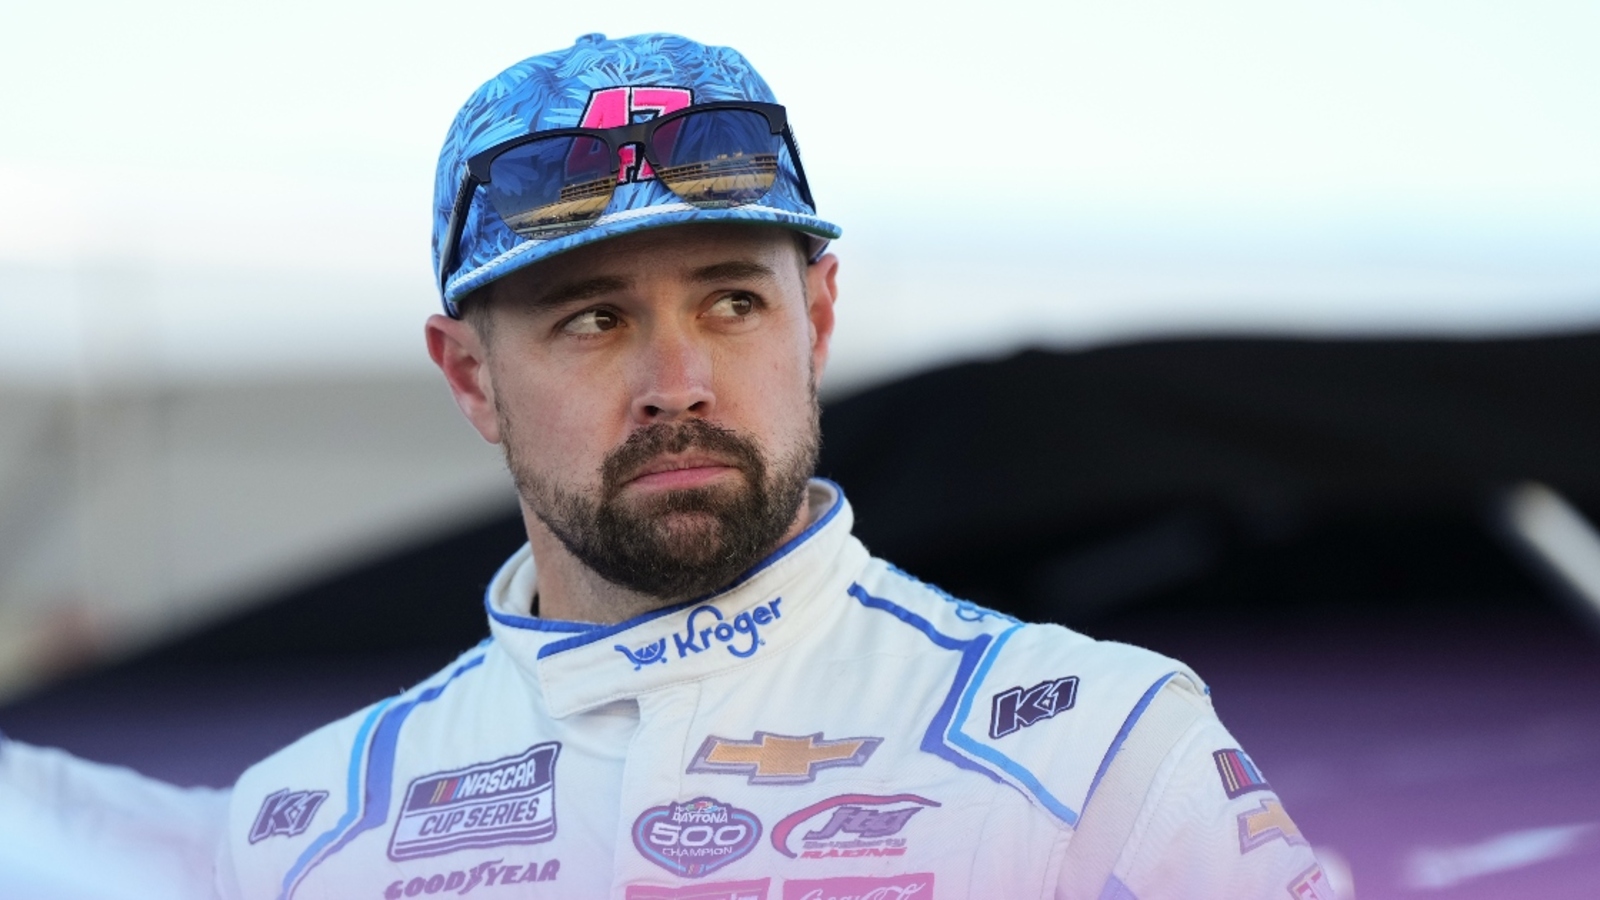 Ricky Stenhouse Jr. on his dad getting involved in Kyle Busch brawl: ‘Dad likes to fight’